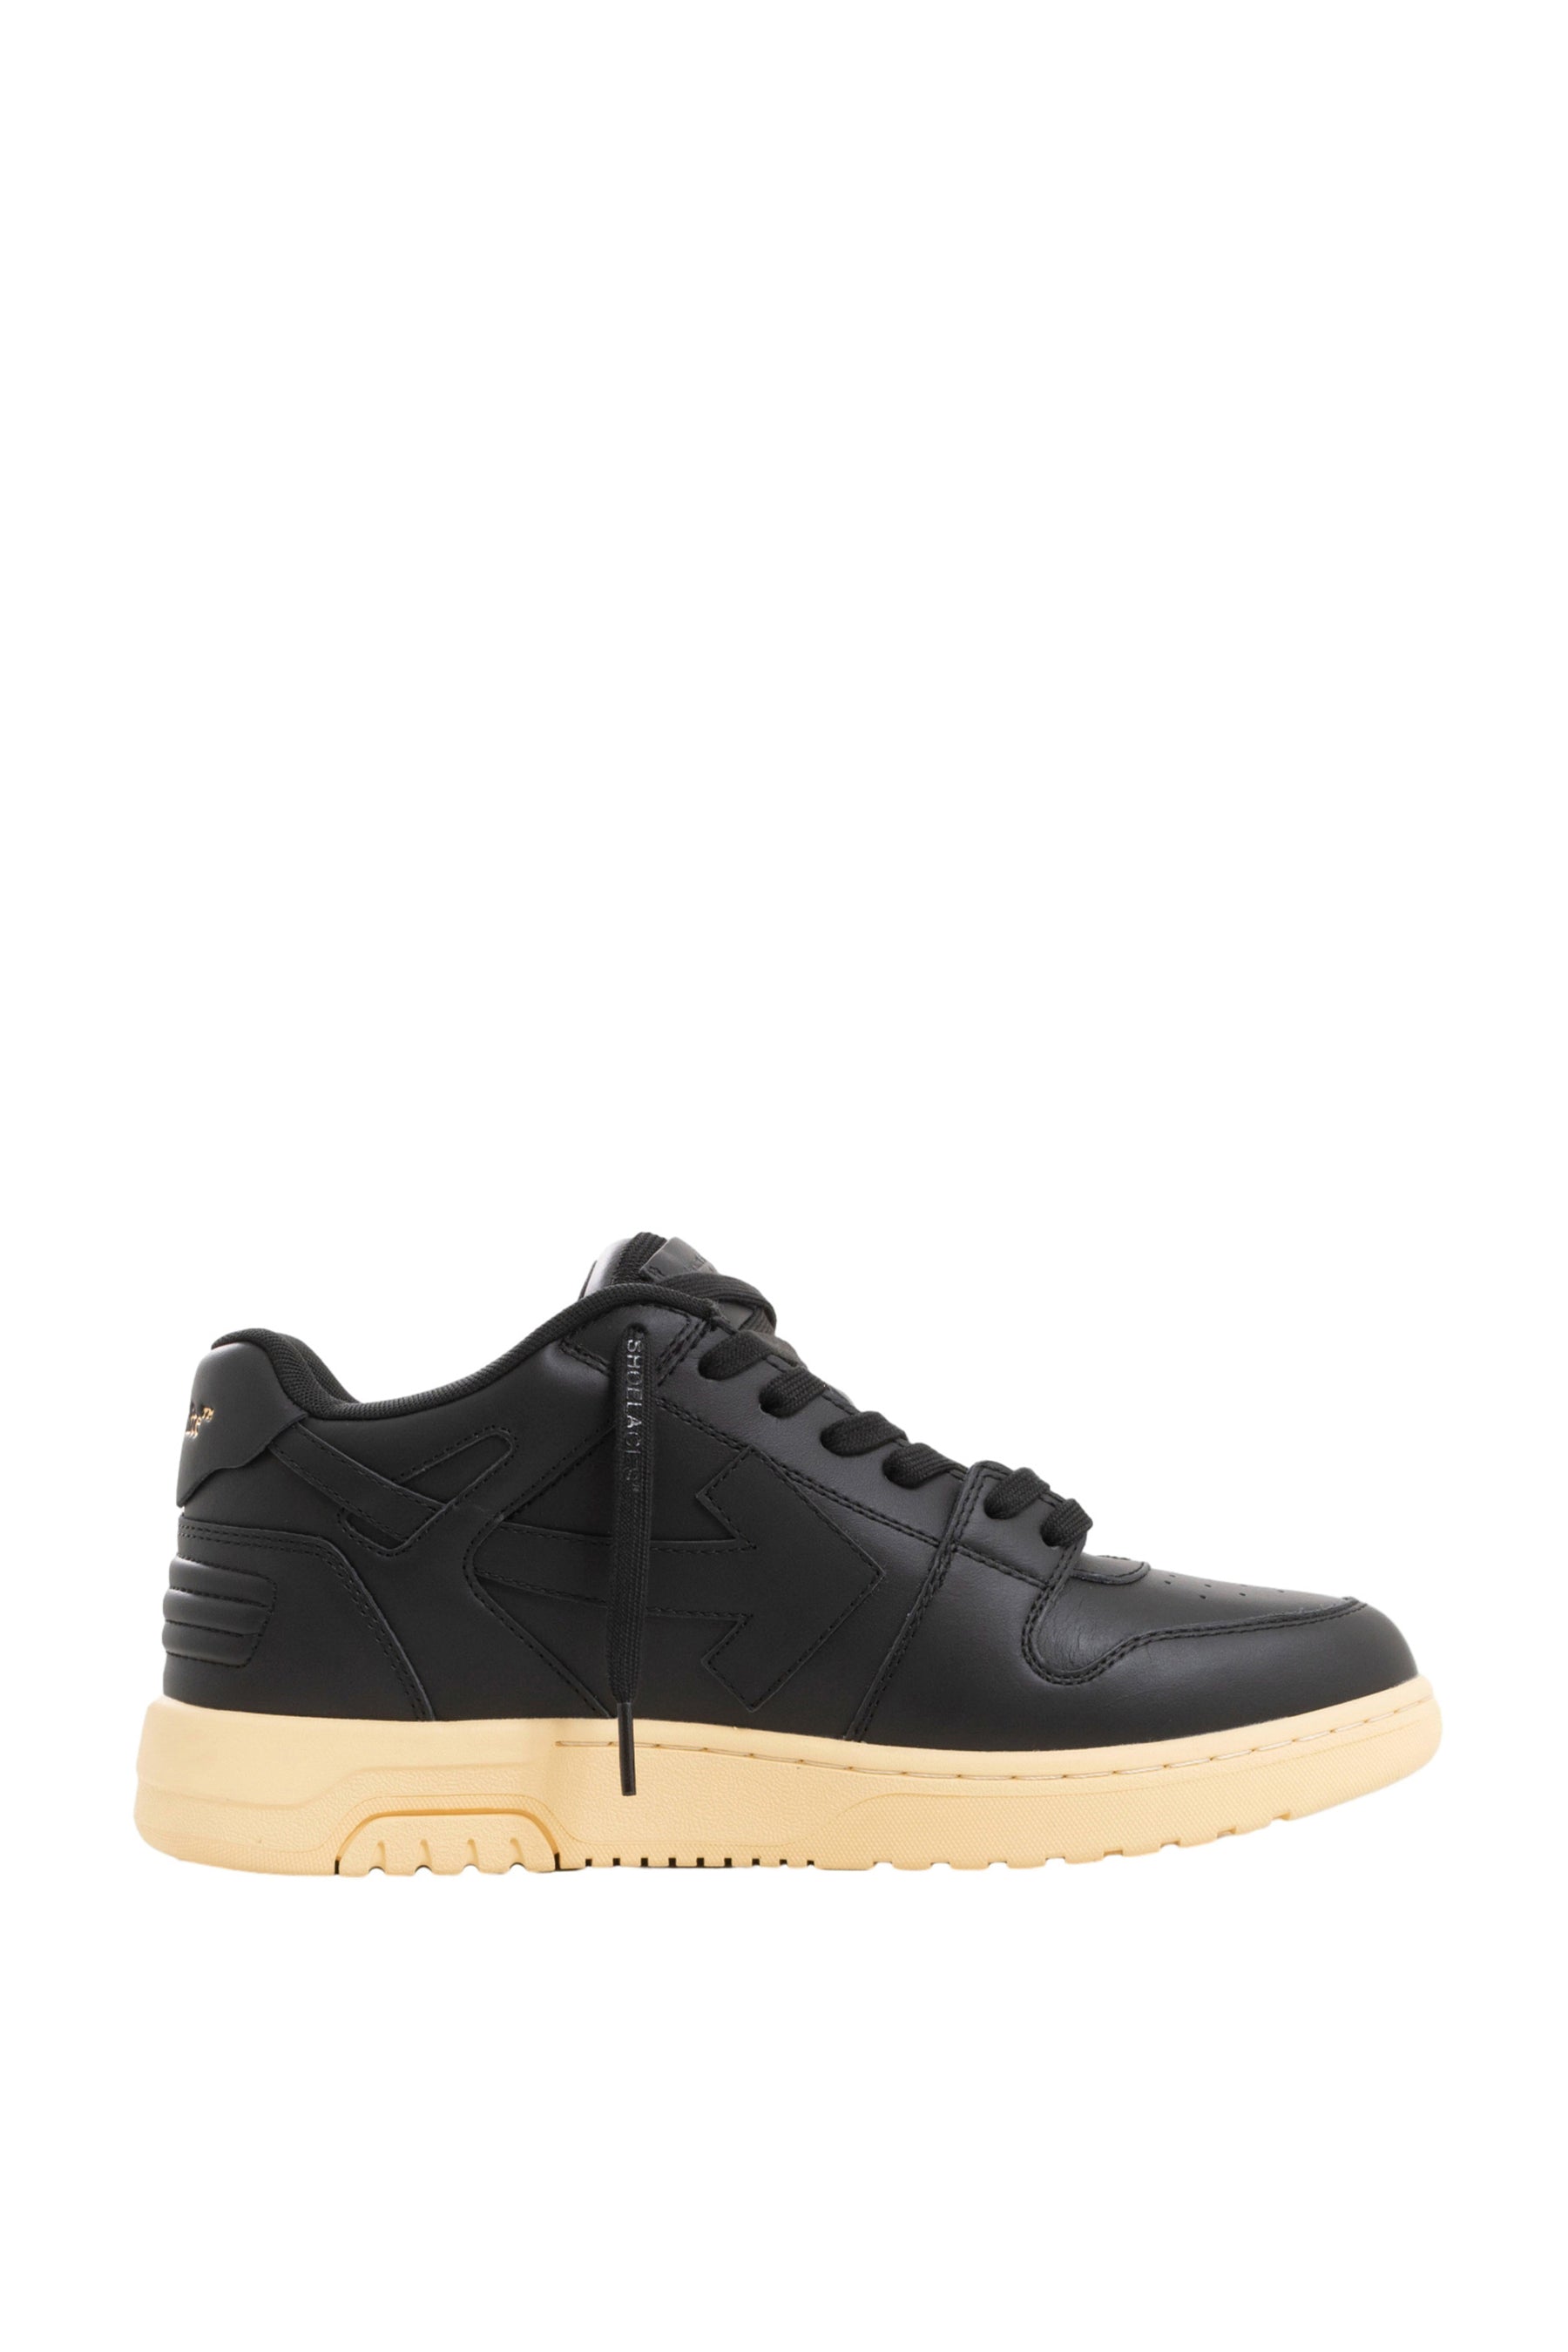 OUT OF OFFICE CALF LEATHER / BLK BLK